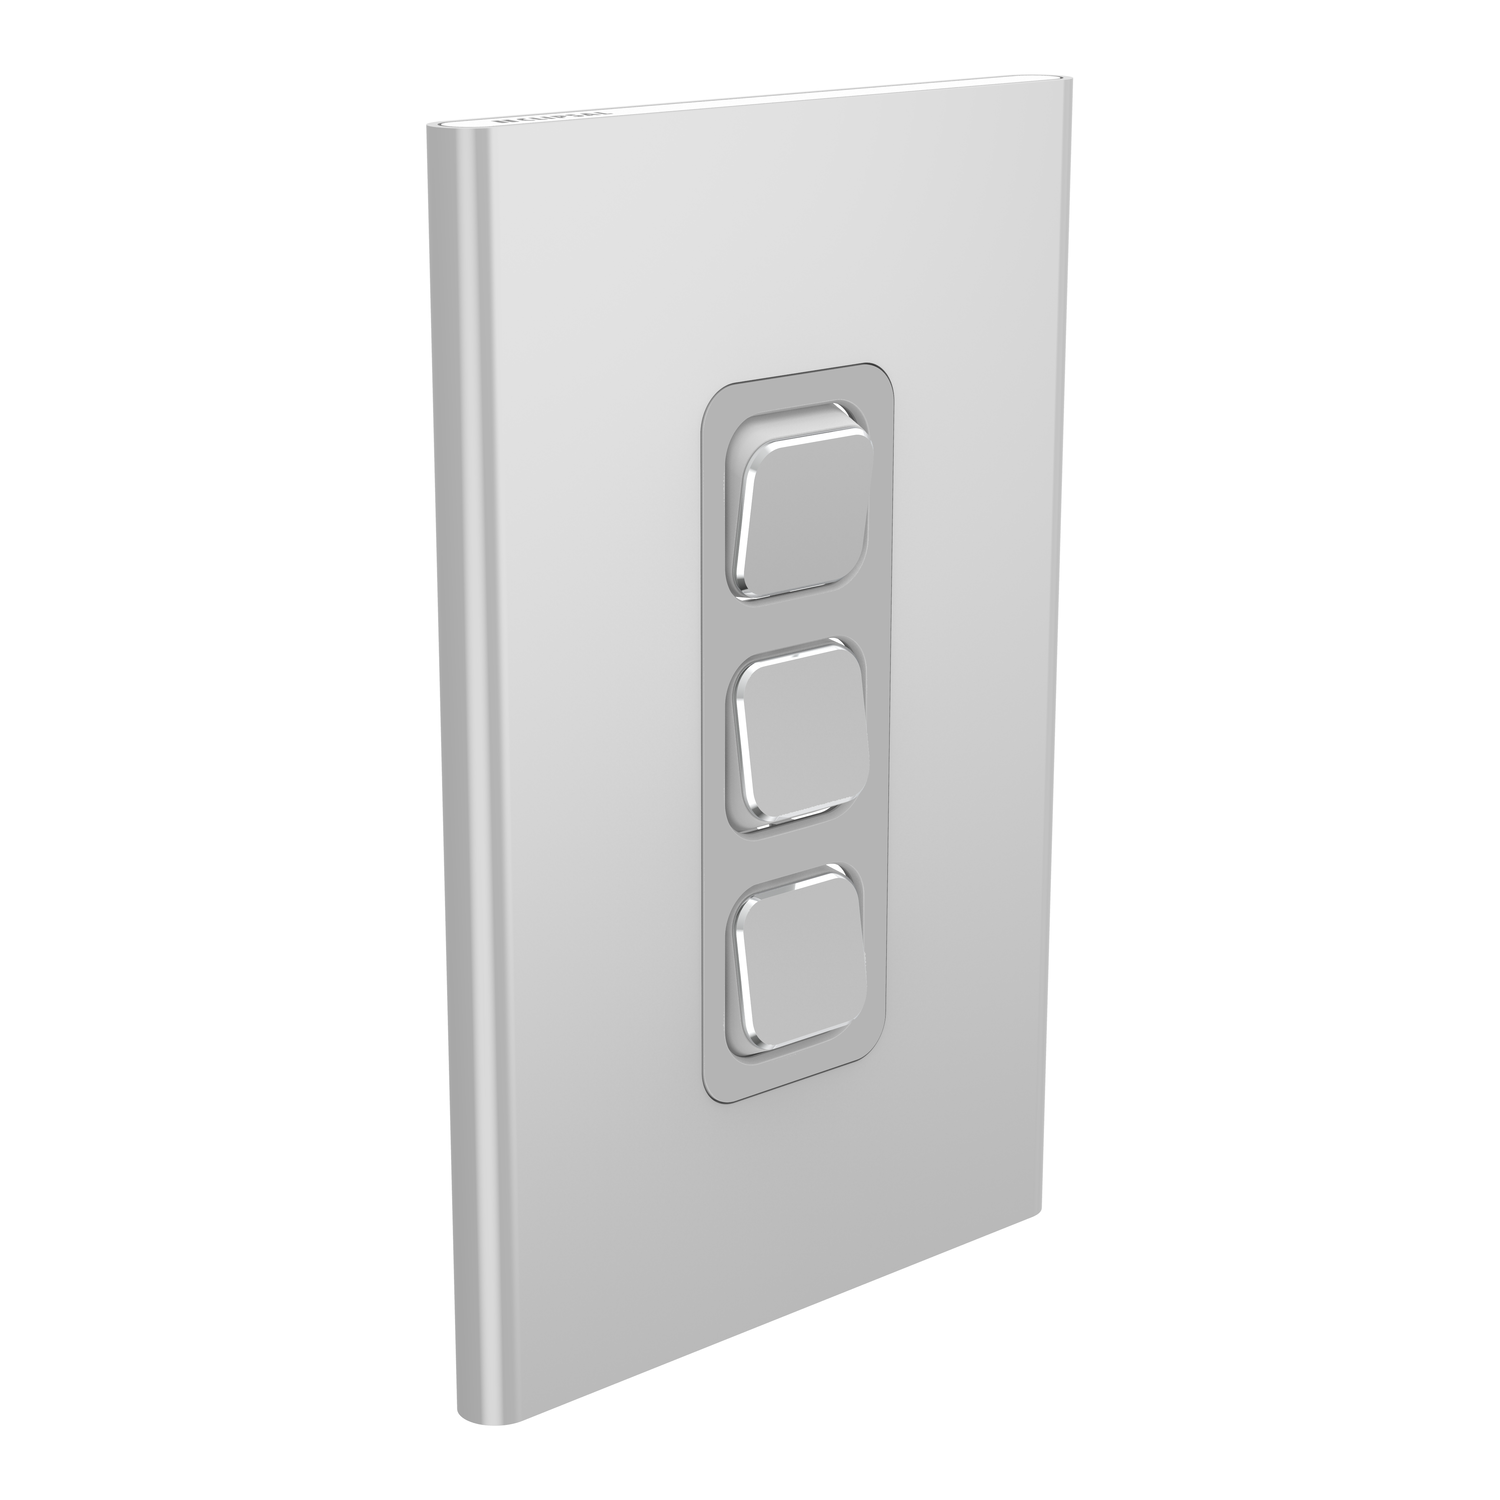 PDL Iconic Styl - Cover Plate Switch 3-Gang - Silver